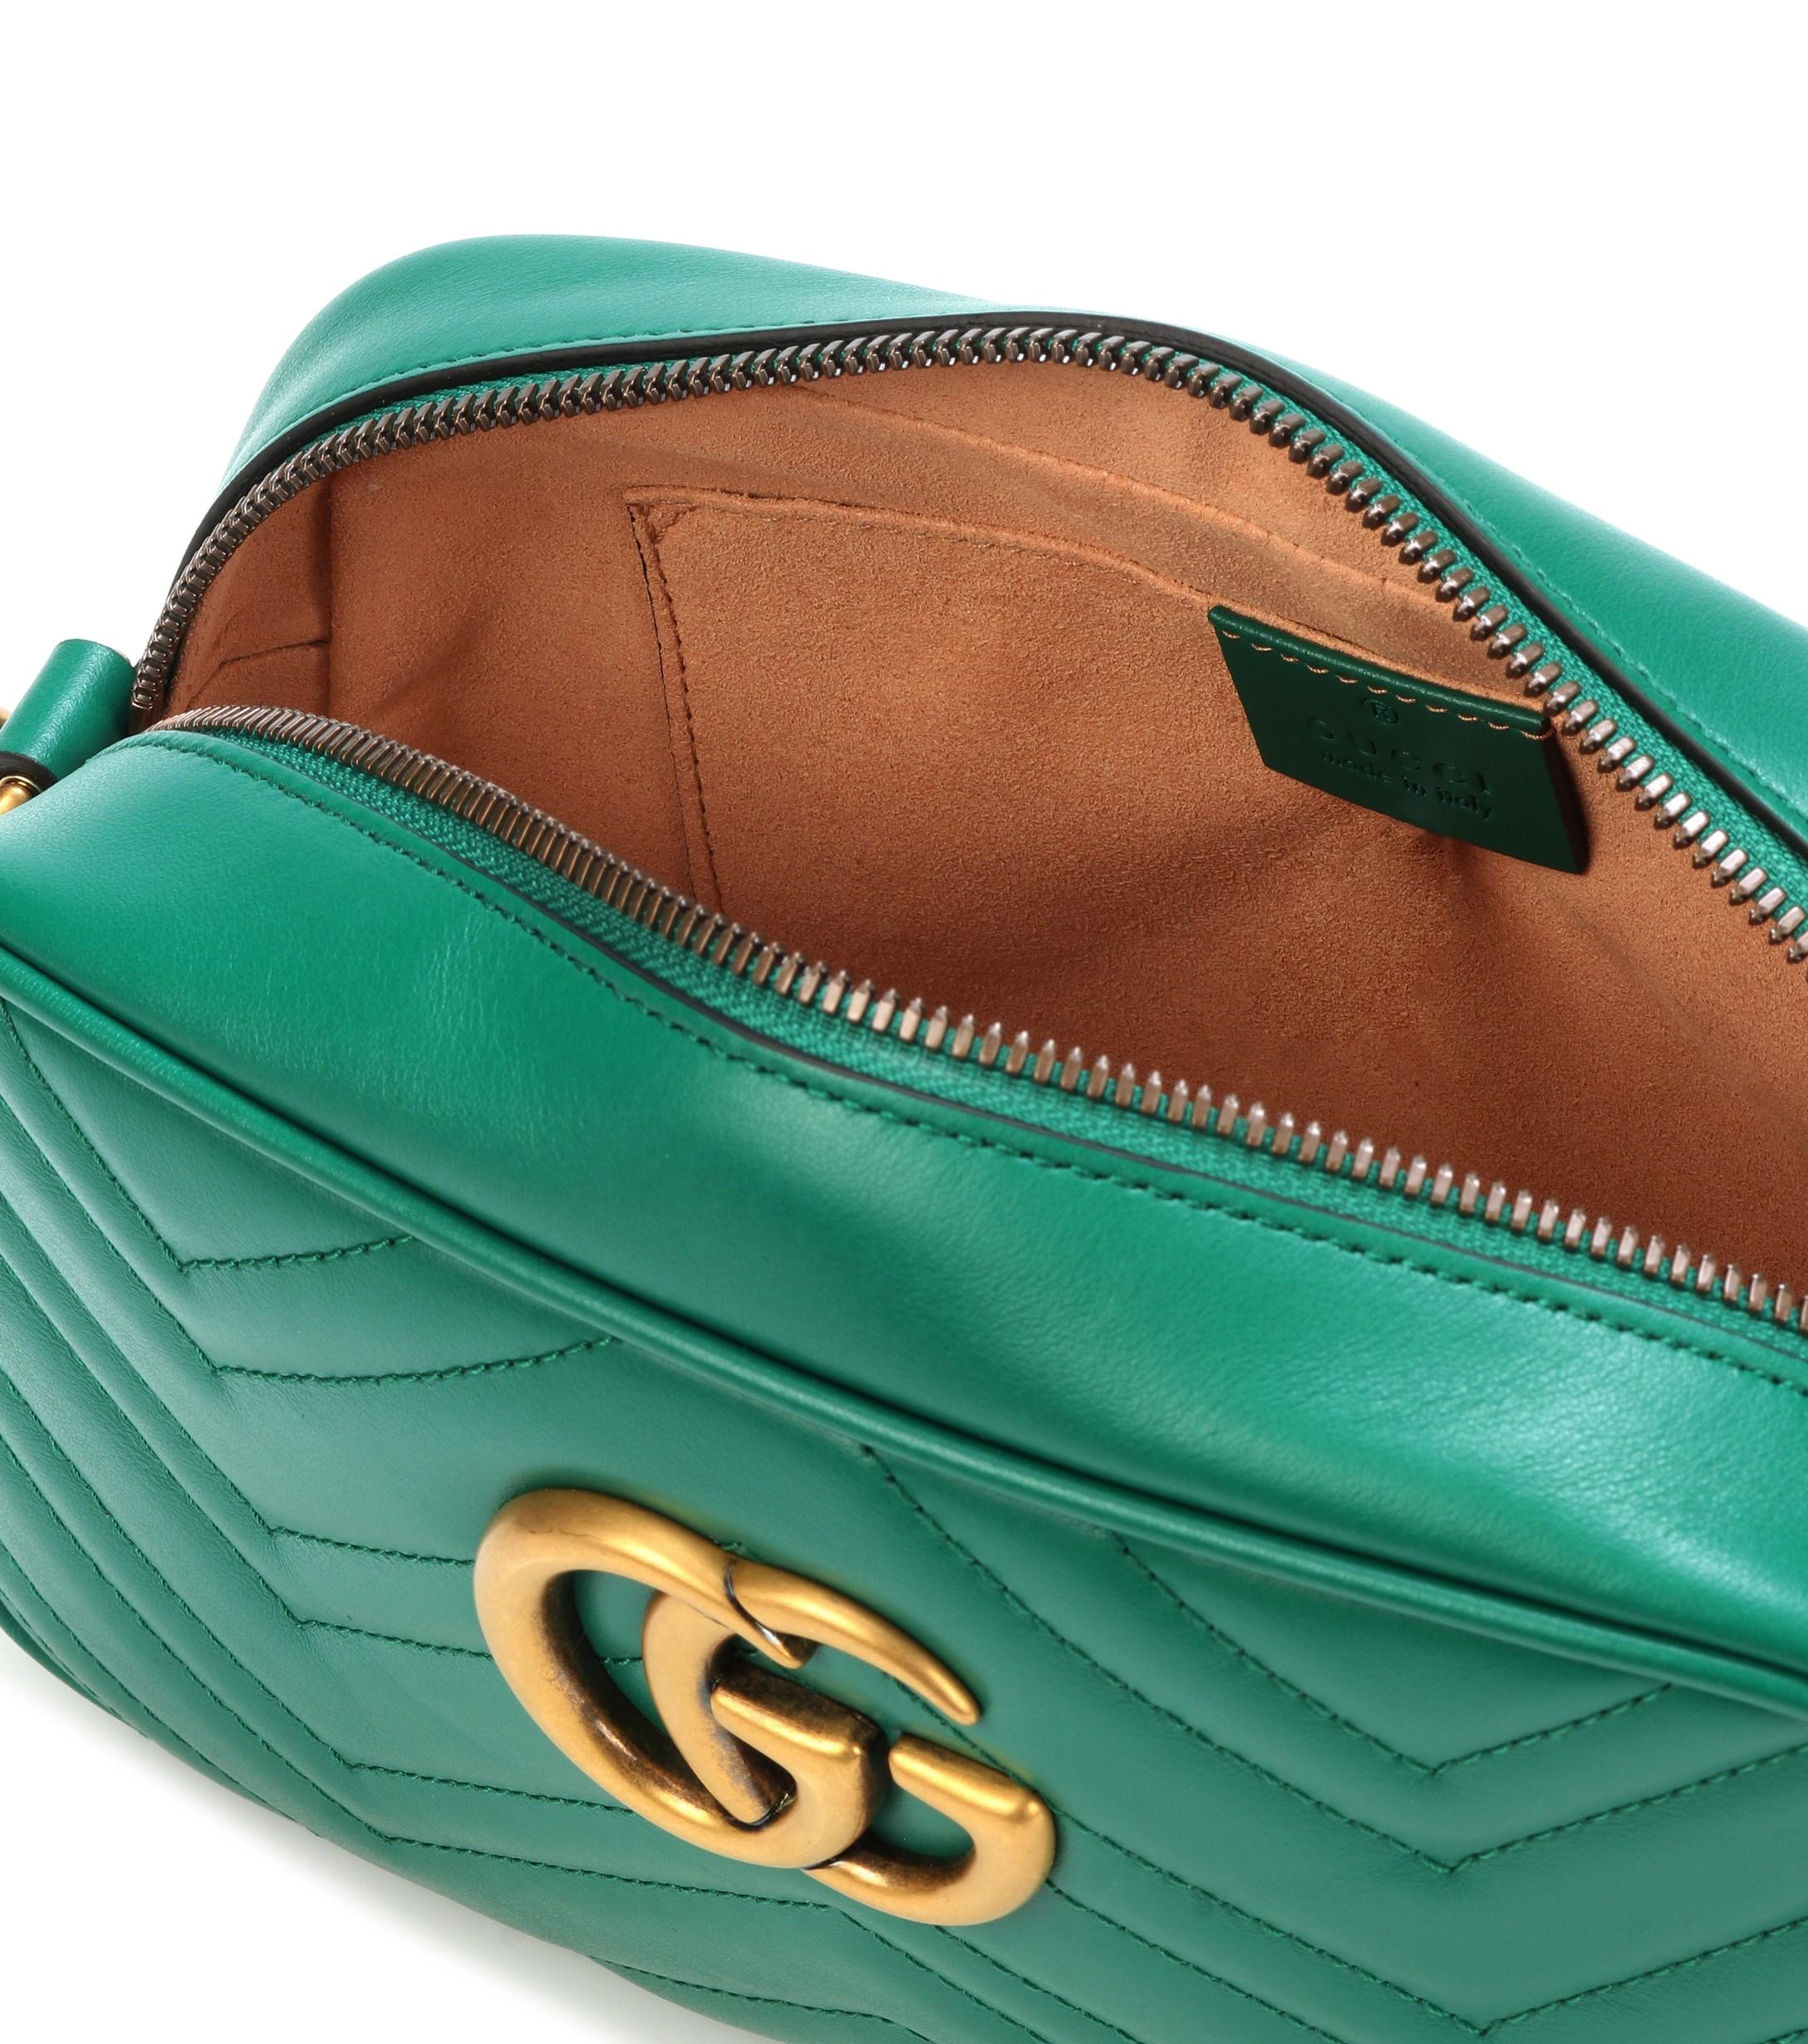 Gucci GG Marmont Small Shoulder Bag in Emerald (Green) - Lyst